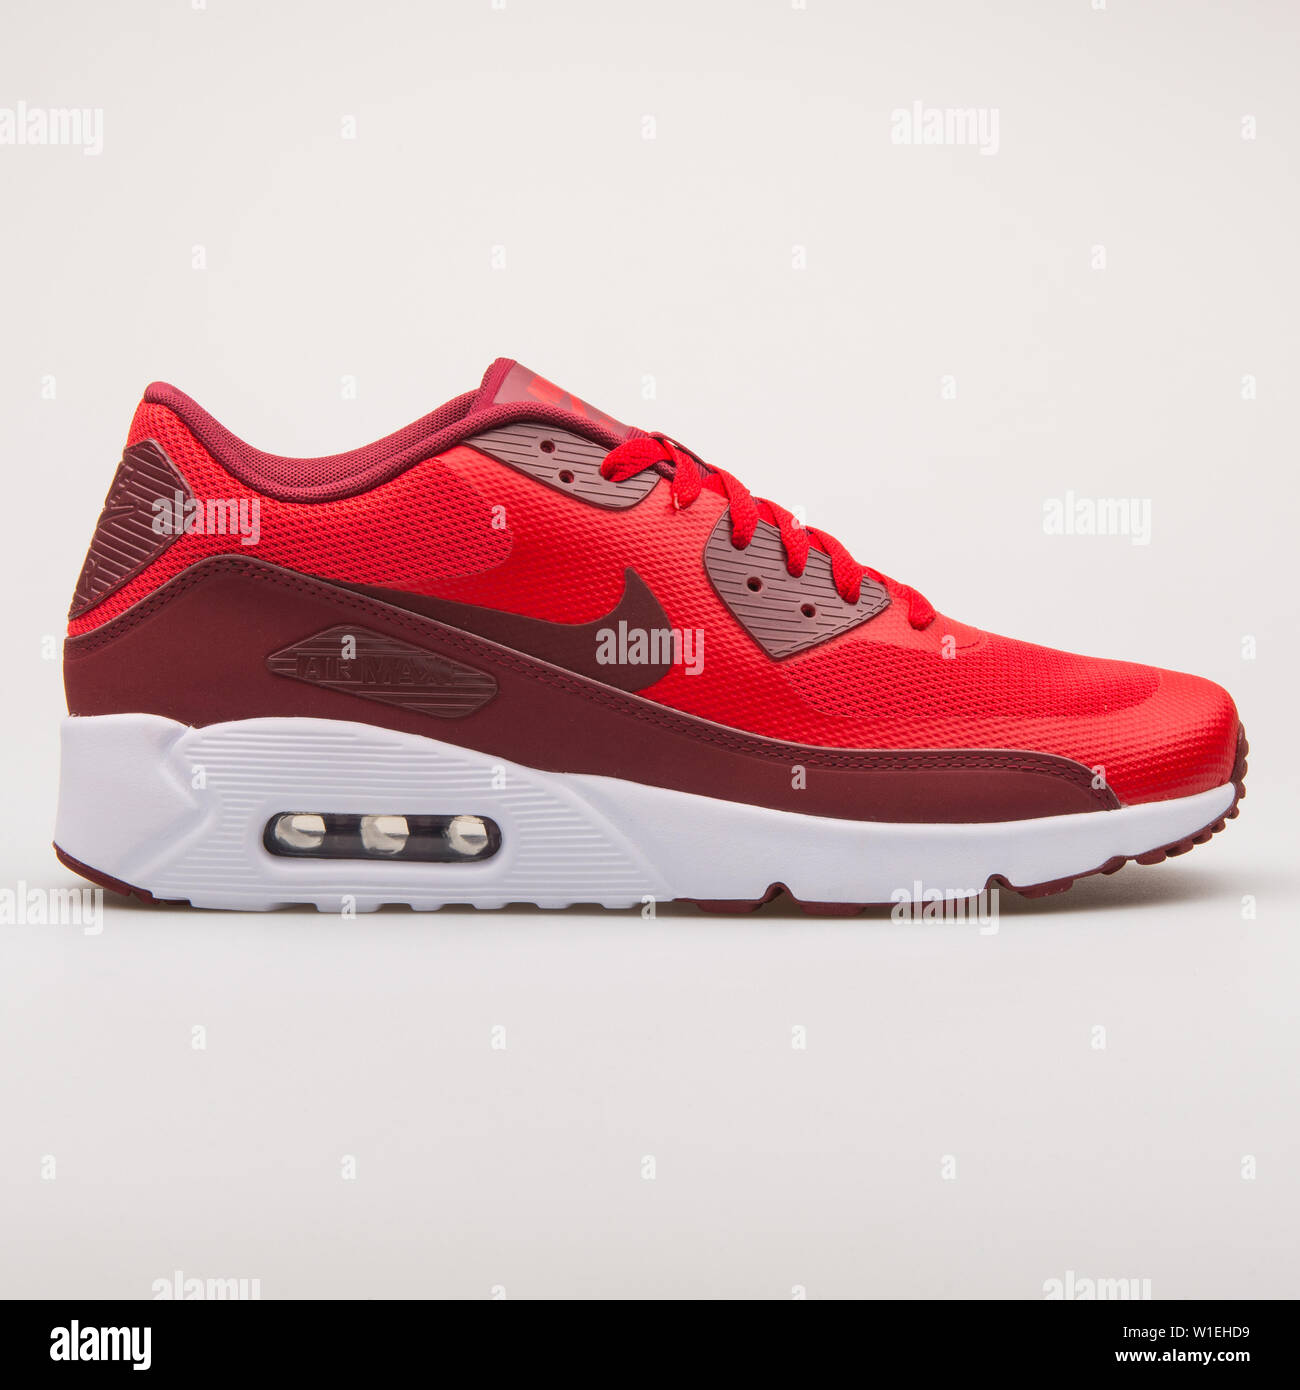 VIENNA, AUSTRIA - AUGUST 23, 2017: Nike Air Max 90 Ultra 2.0 Essential red  sneaker on white background Stock Photo - Alamy